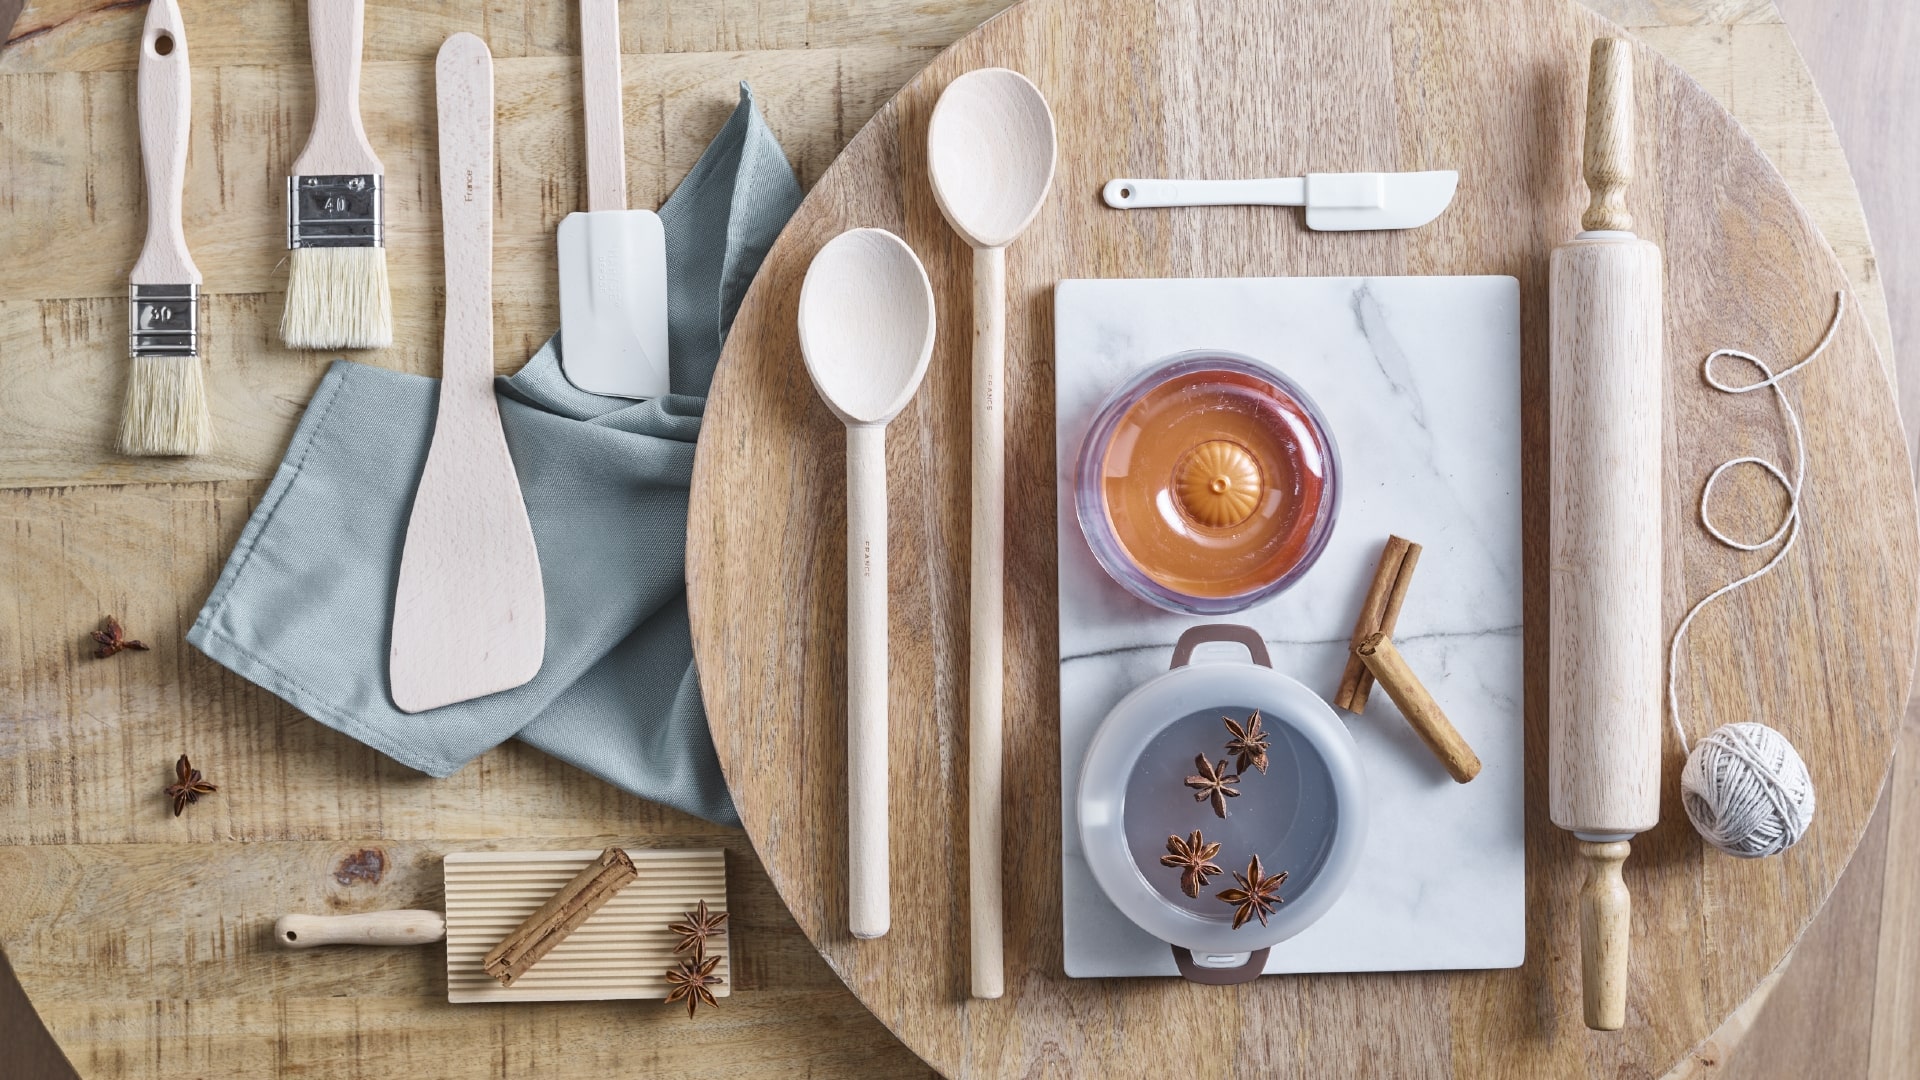 Choosing The Right Kitchen Tools